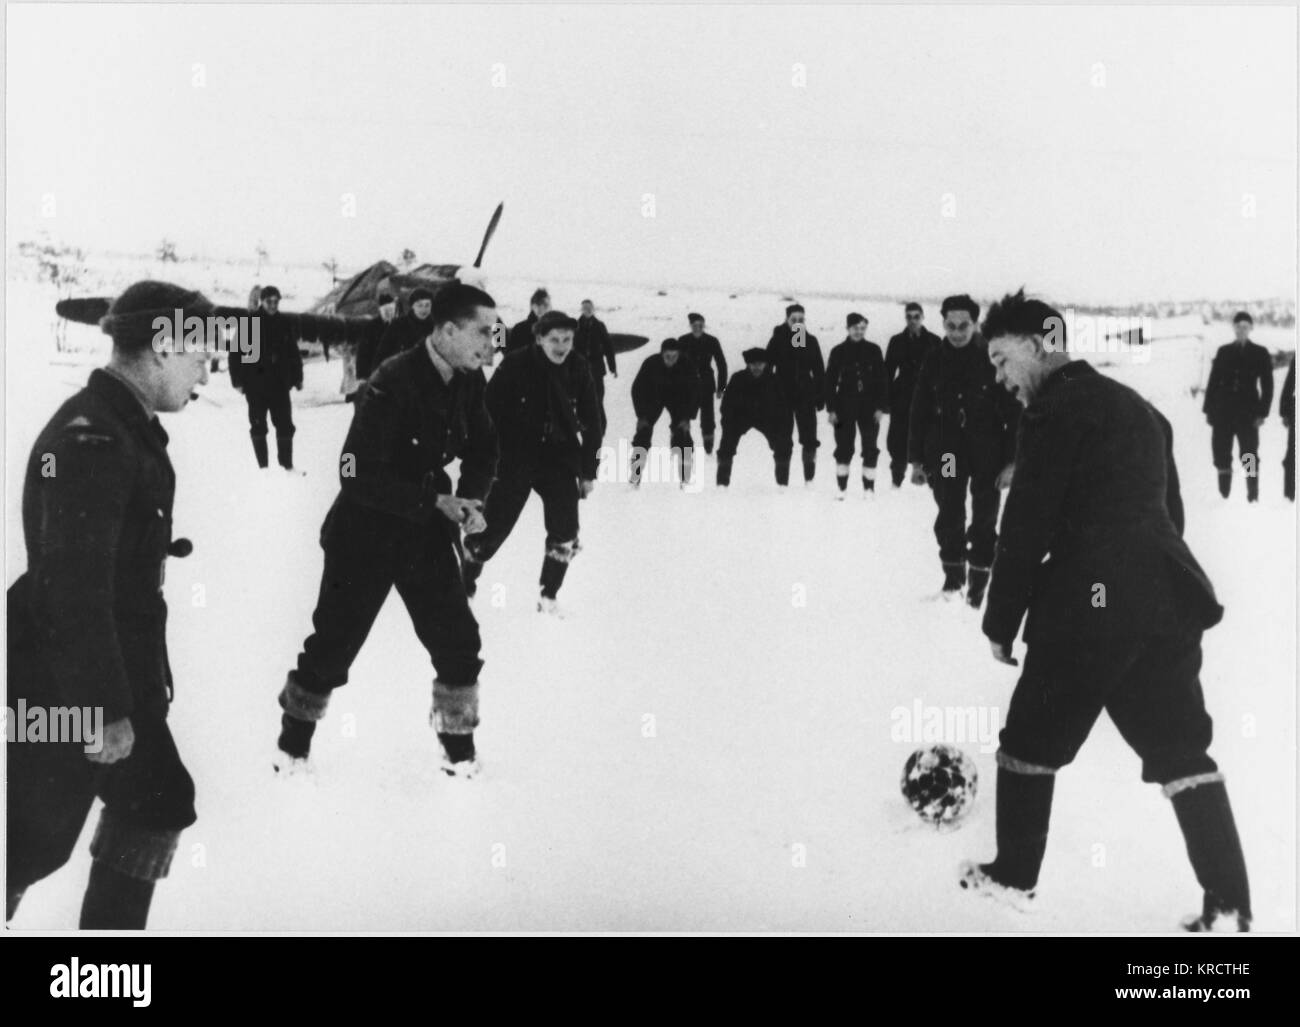 Anglo-Soviet soccer match, Murmansk, RAF and Soviet Airforce. The RAF provided air-cover for convoys in their Hawker Hurricanes (background) Date: 1939 - 1945 Stock Photo